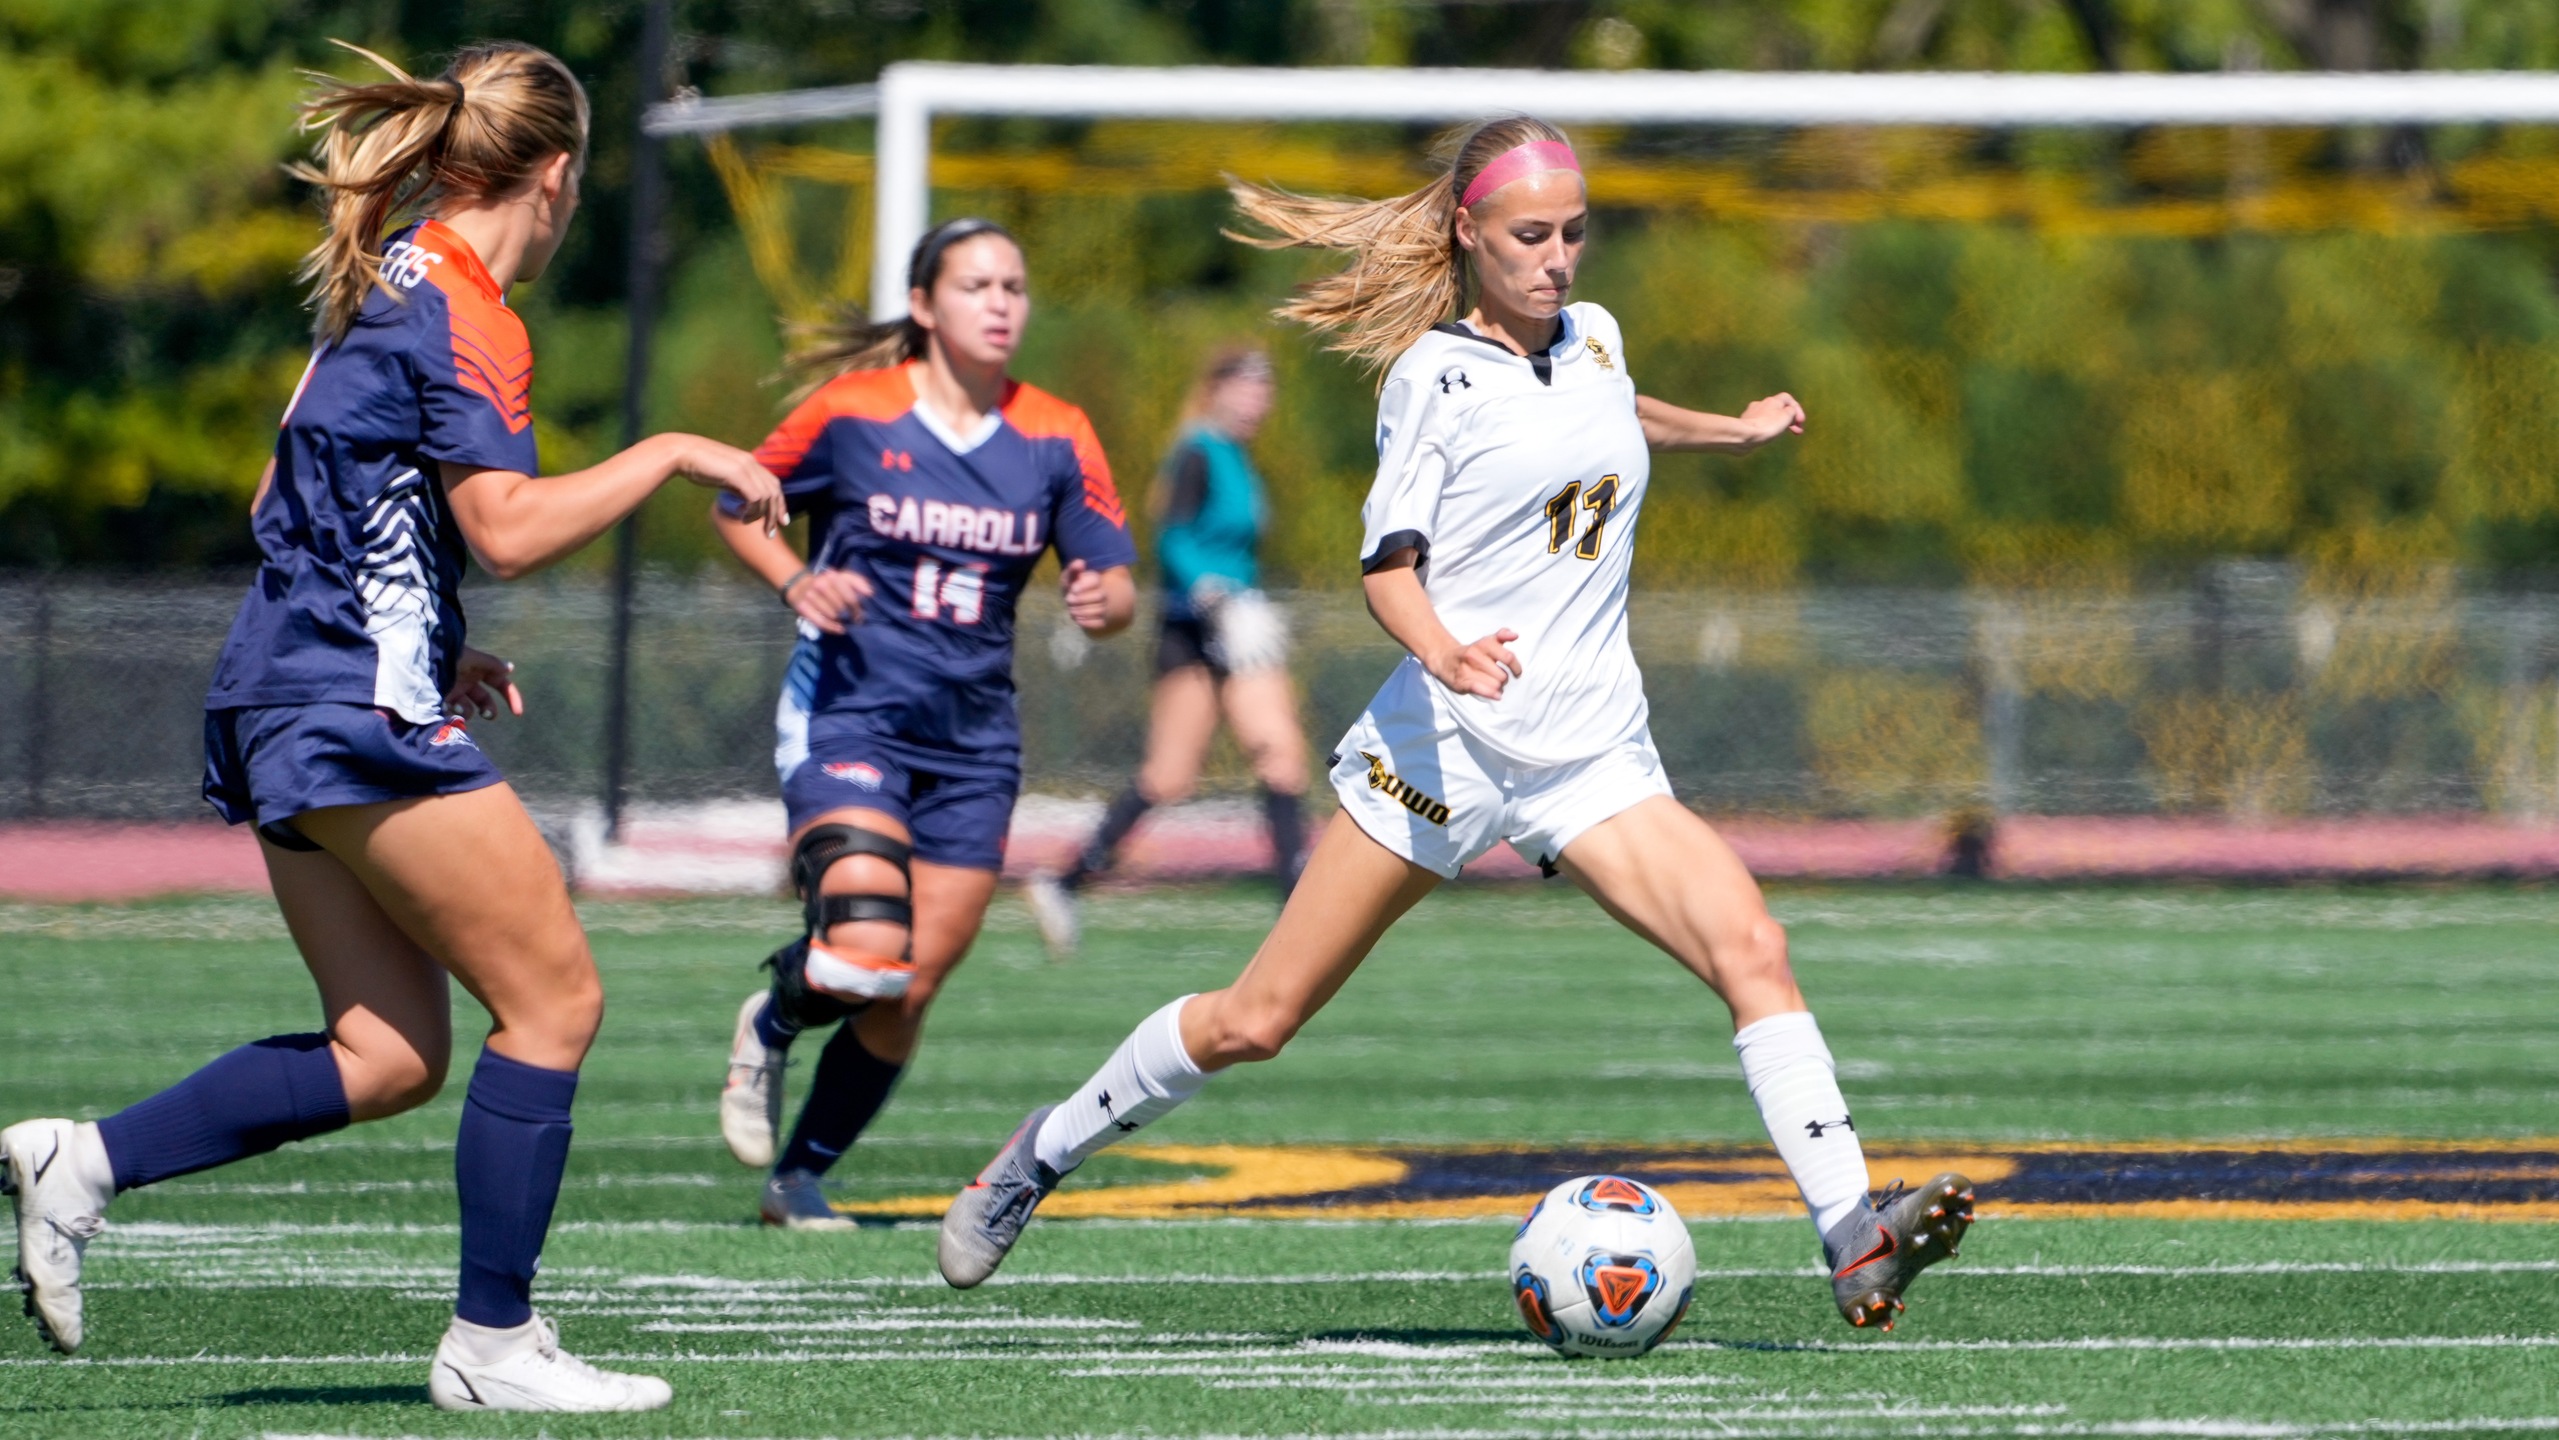 Molly Jackson's second goal of the season secured the Titans' victory over the Pioneers.